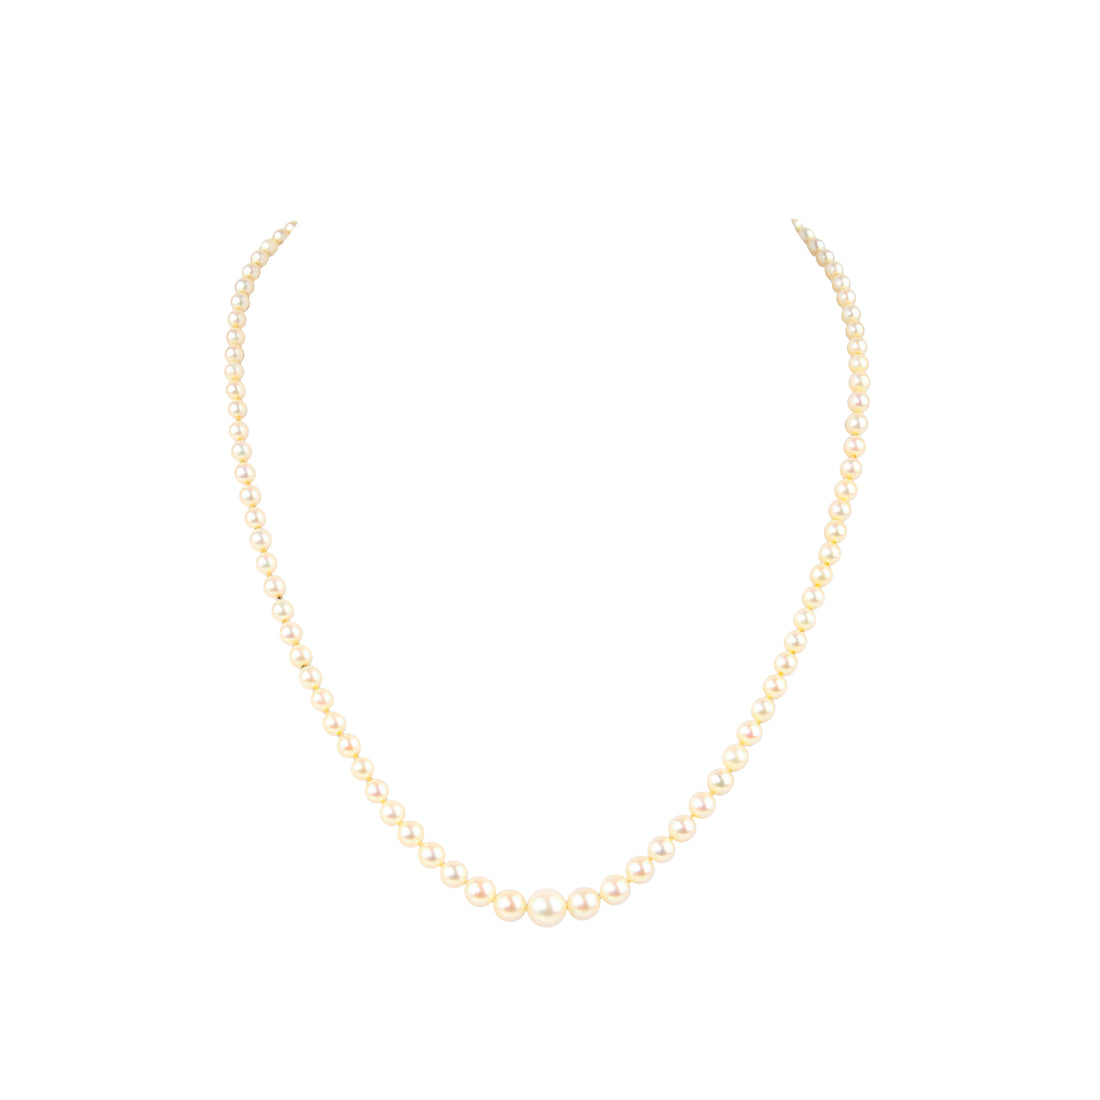 10K Graduated Pearl Necklace